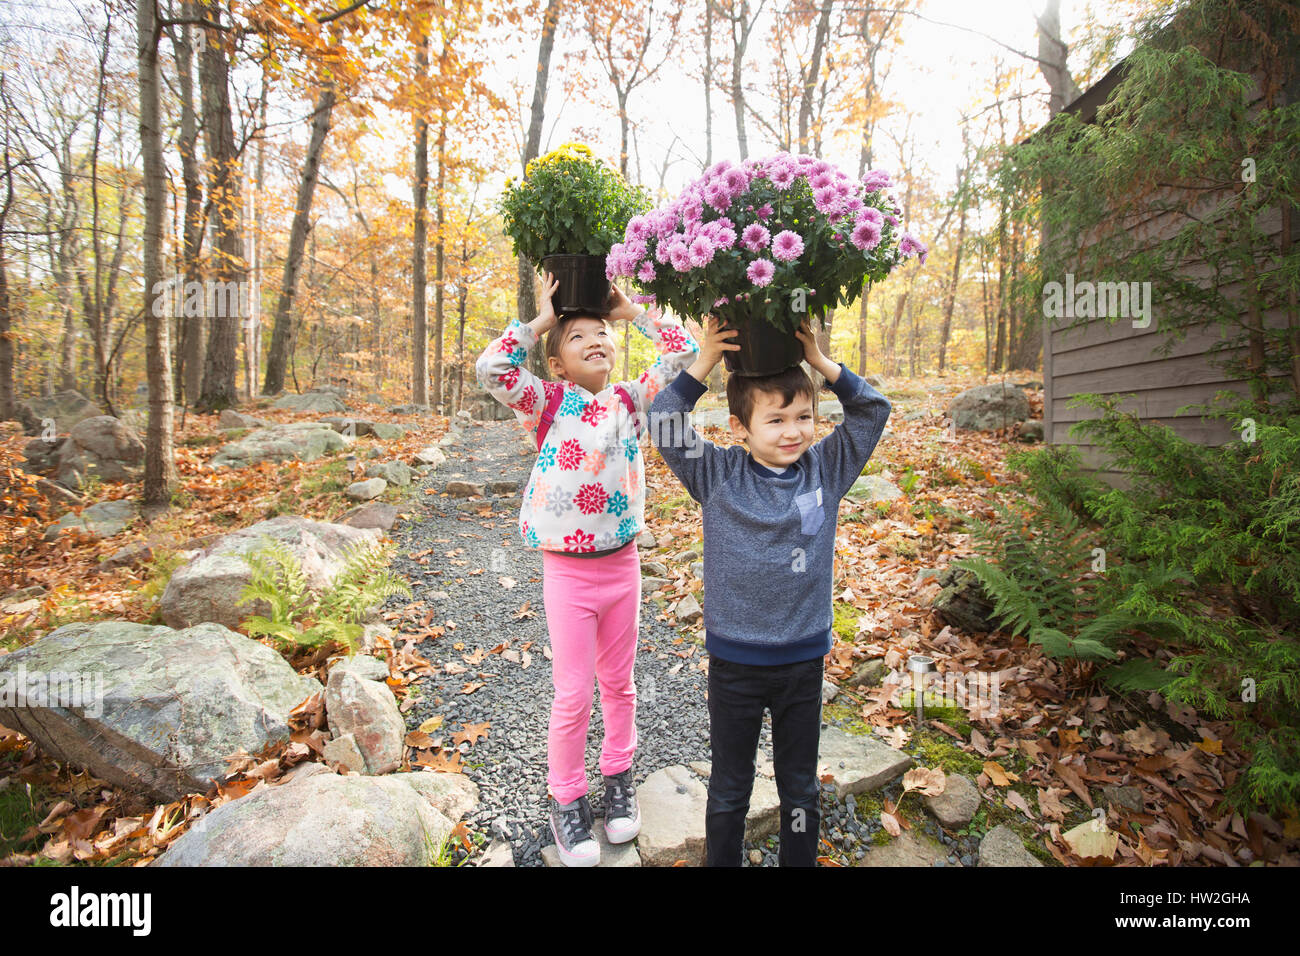 Mixed Race brother and sister balancing flowers on heads Stock Photo